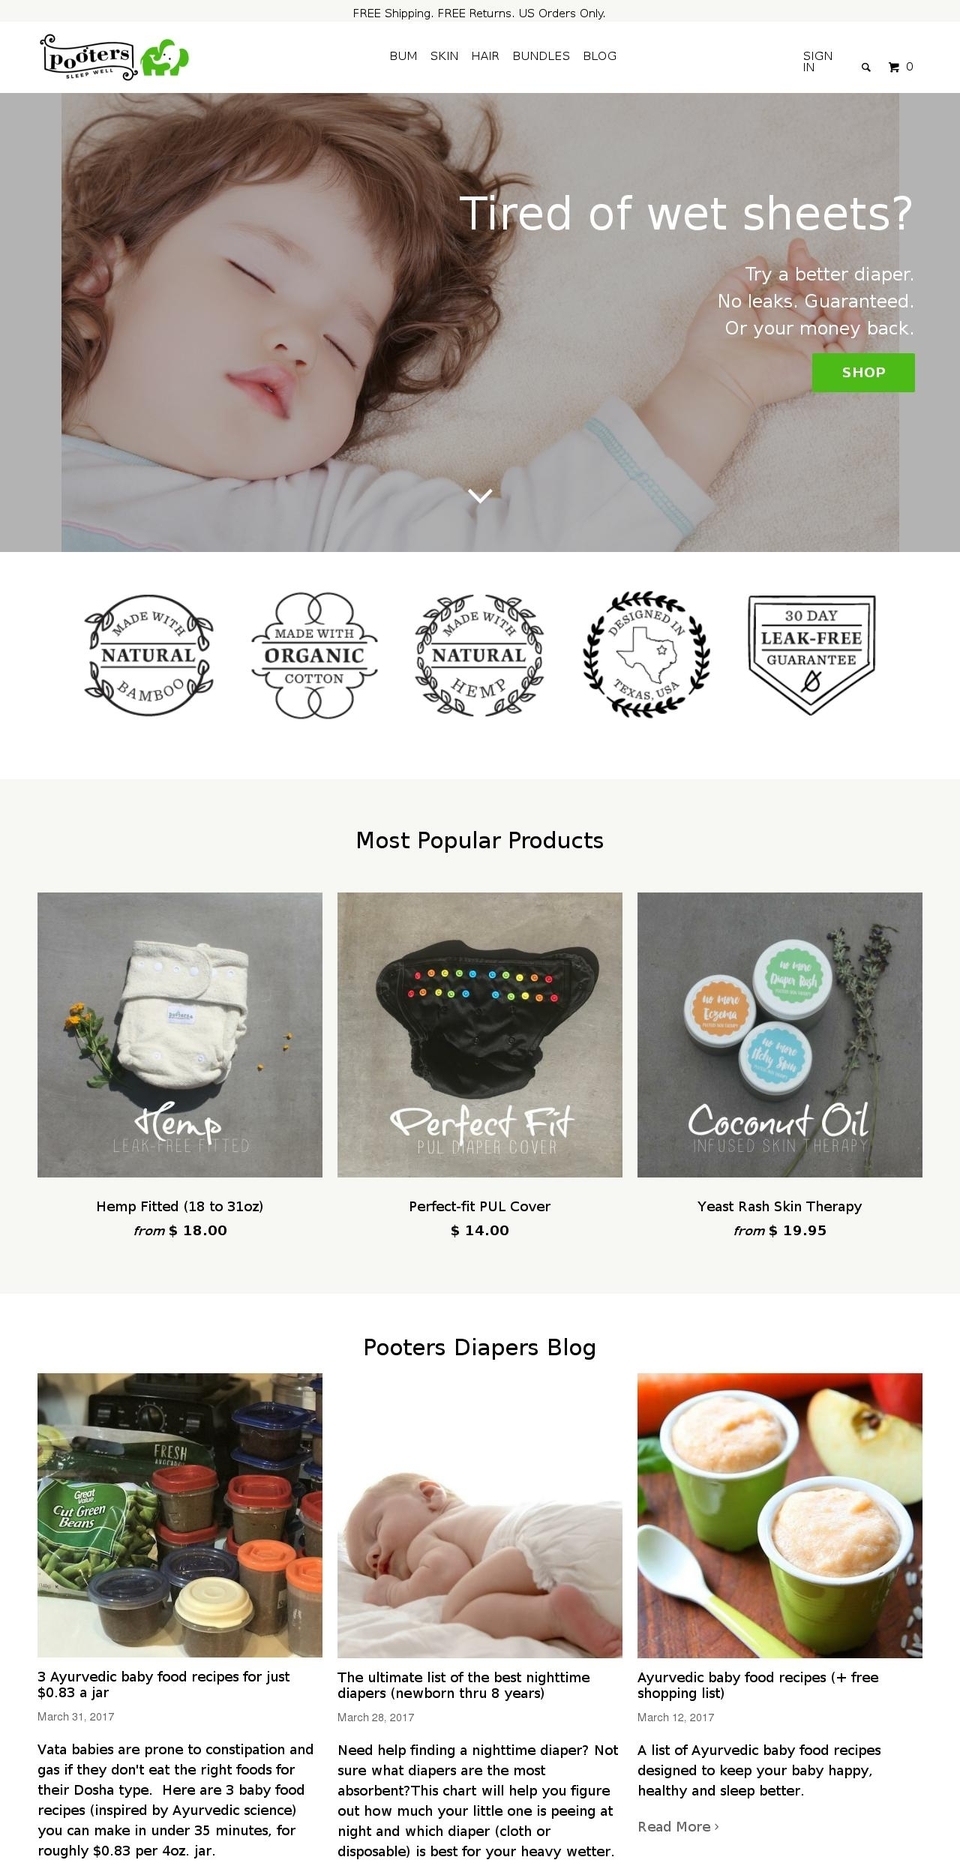 Shella Shopify theme site example pootersdiapers.com